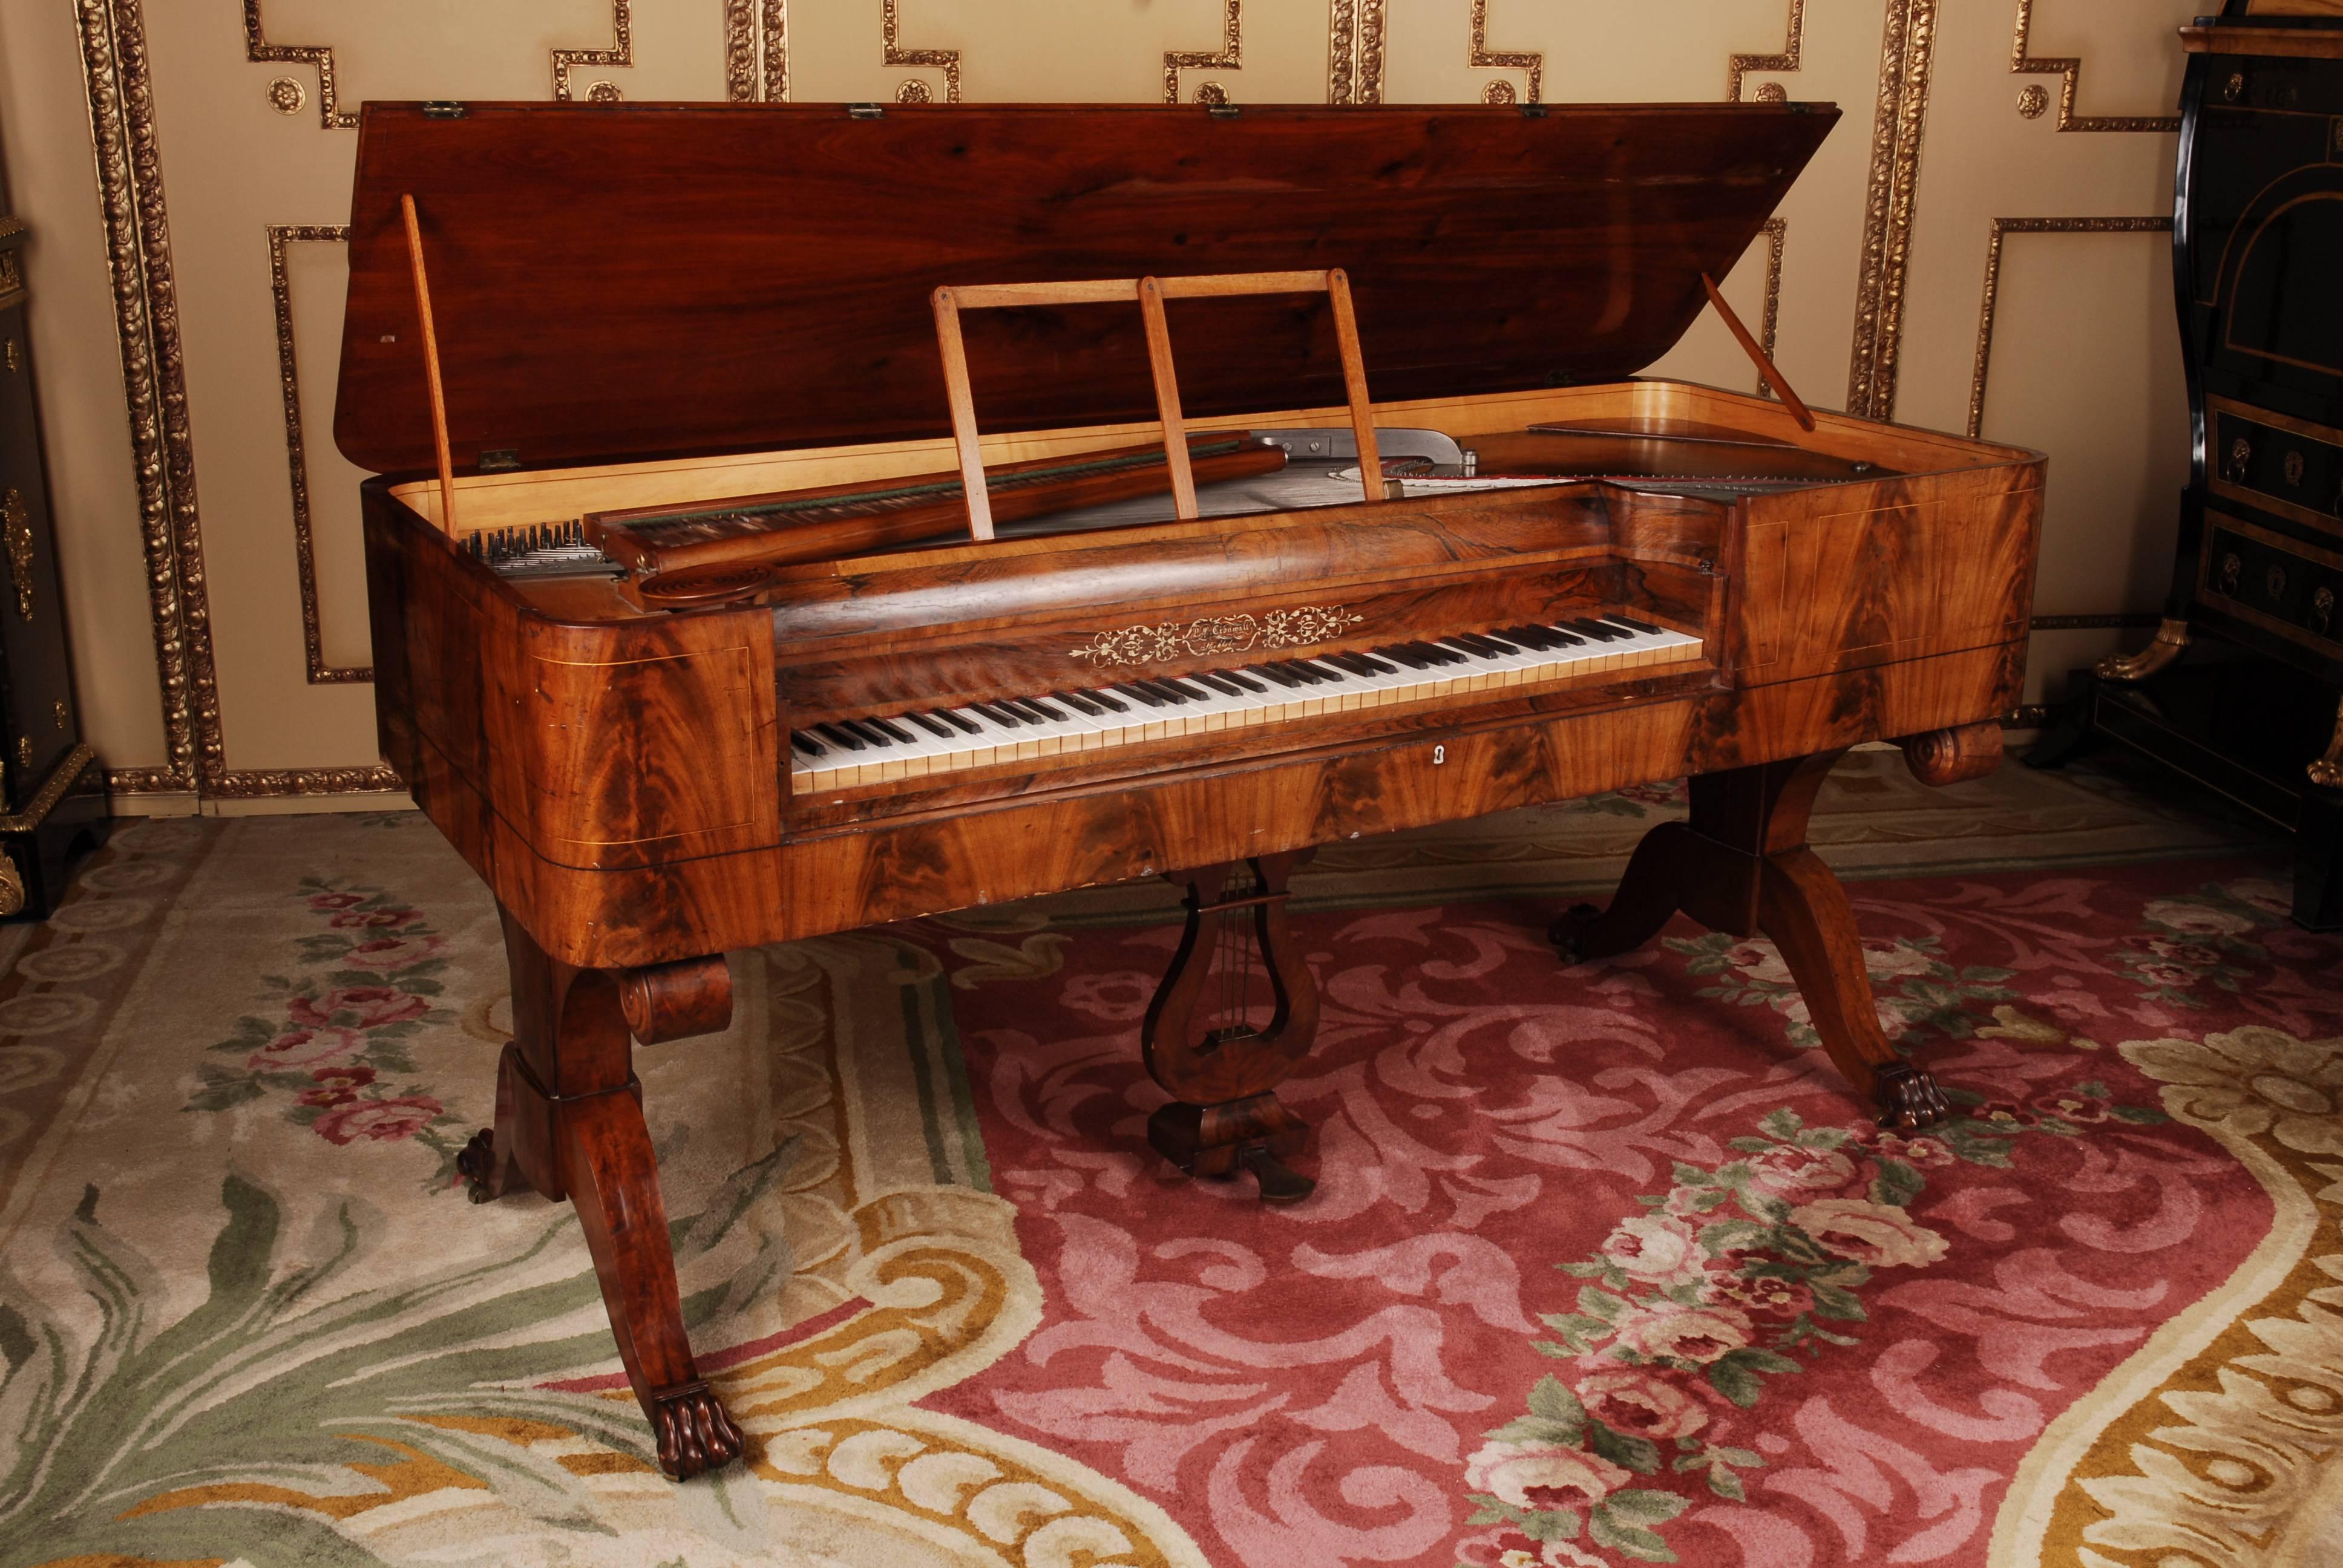 Cuba mahogany veneer, partial solid mahogany wood

As an instrument made in Stockholm, it is already a rarity, since the capital or region was for Tafelklaviere Stuttgart. There they were mainly found in middle-class households.

At the corners